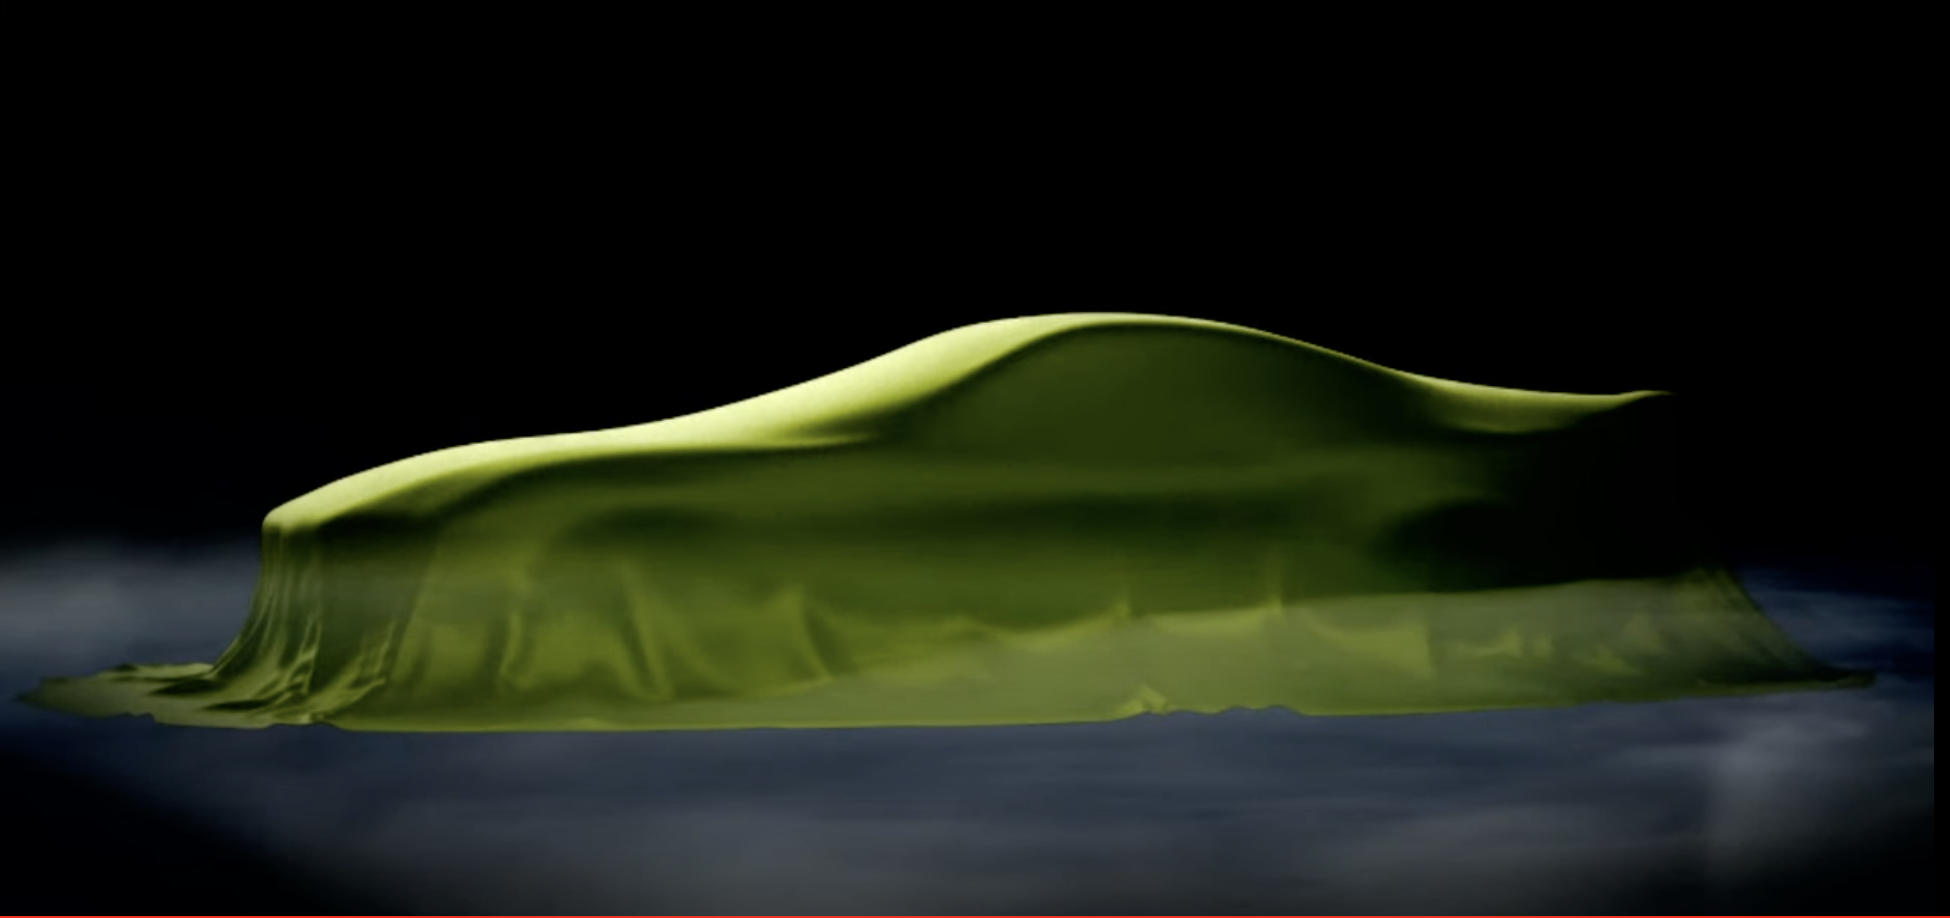 S650 Mustang Ford Teases "New Addition to the Mustang Stable" Coming in 2025 1713400057130-f5